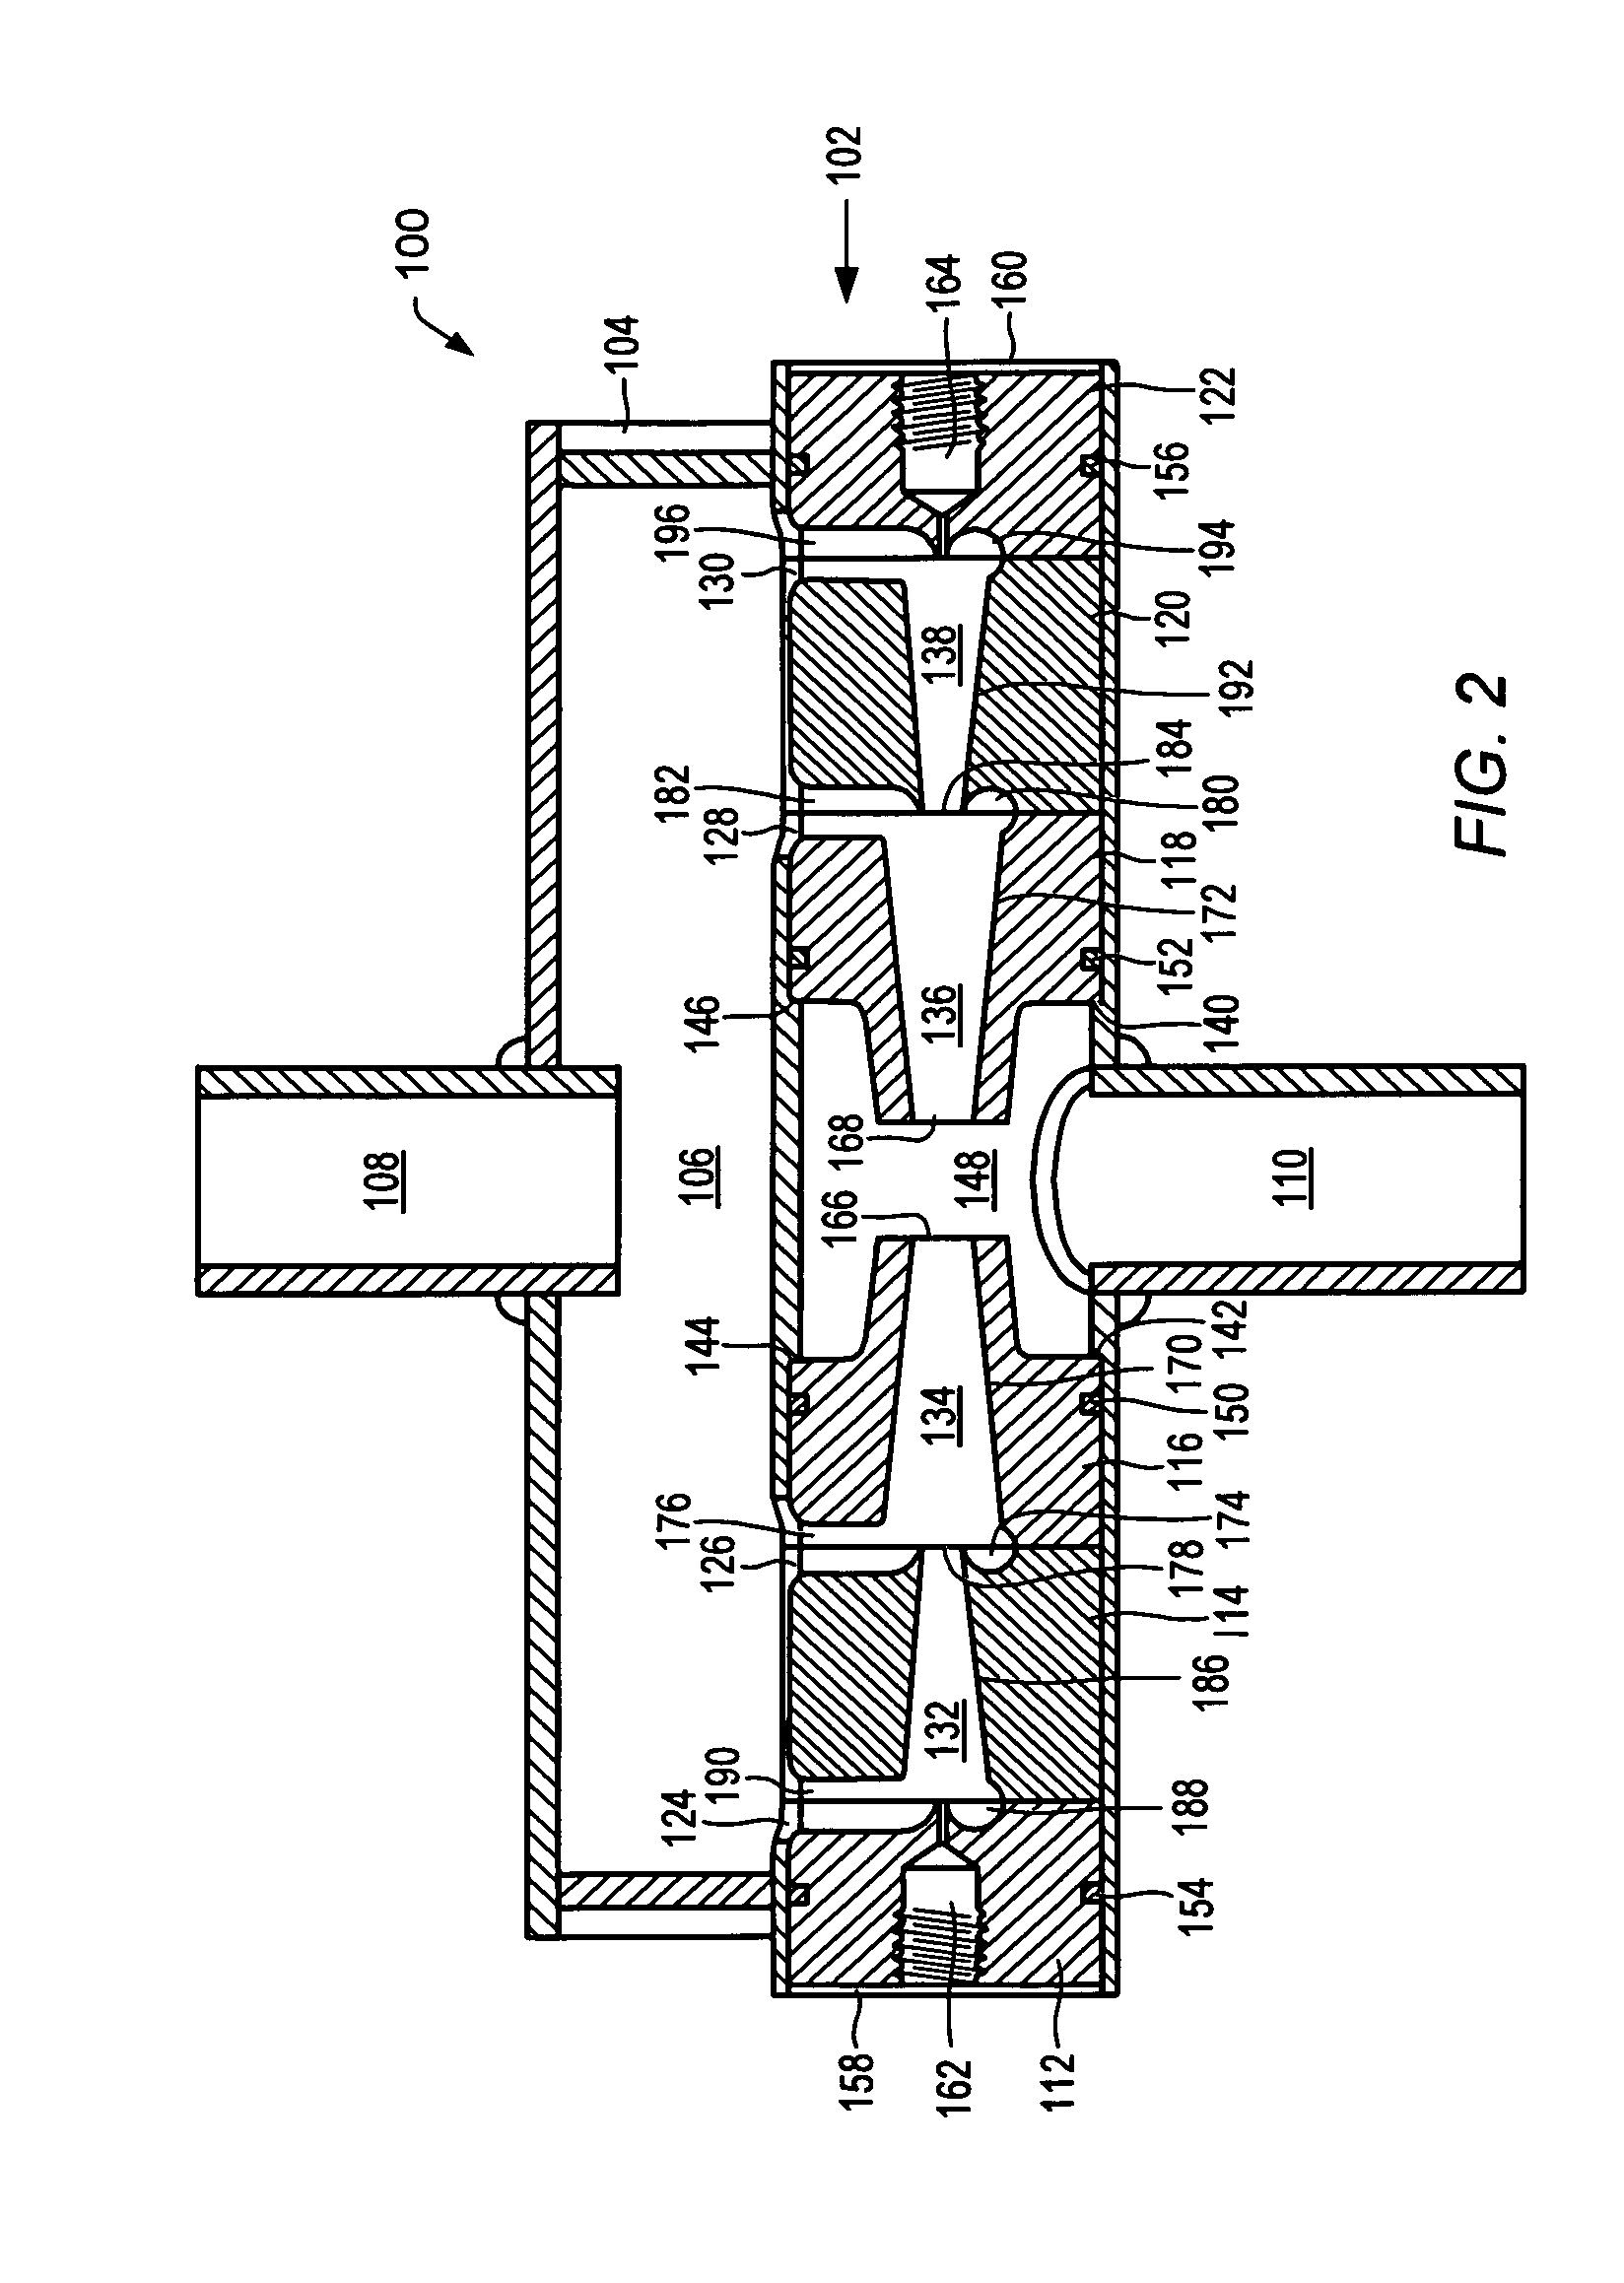 Systems and methods for treatment of wastewater